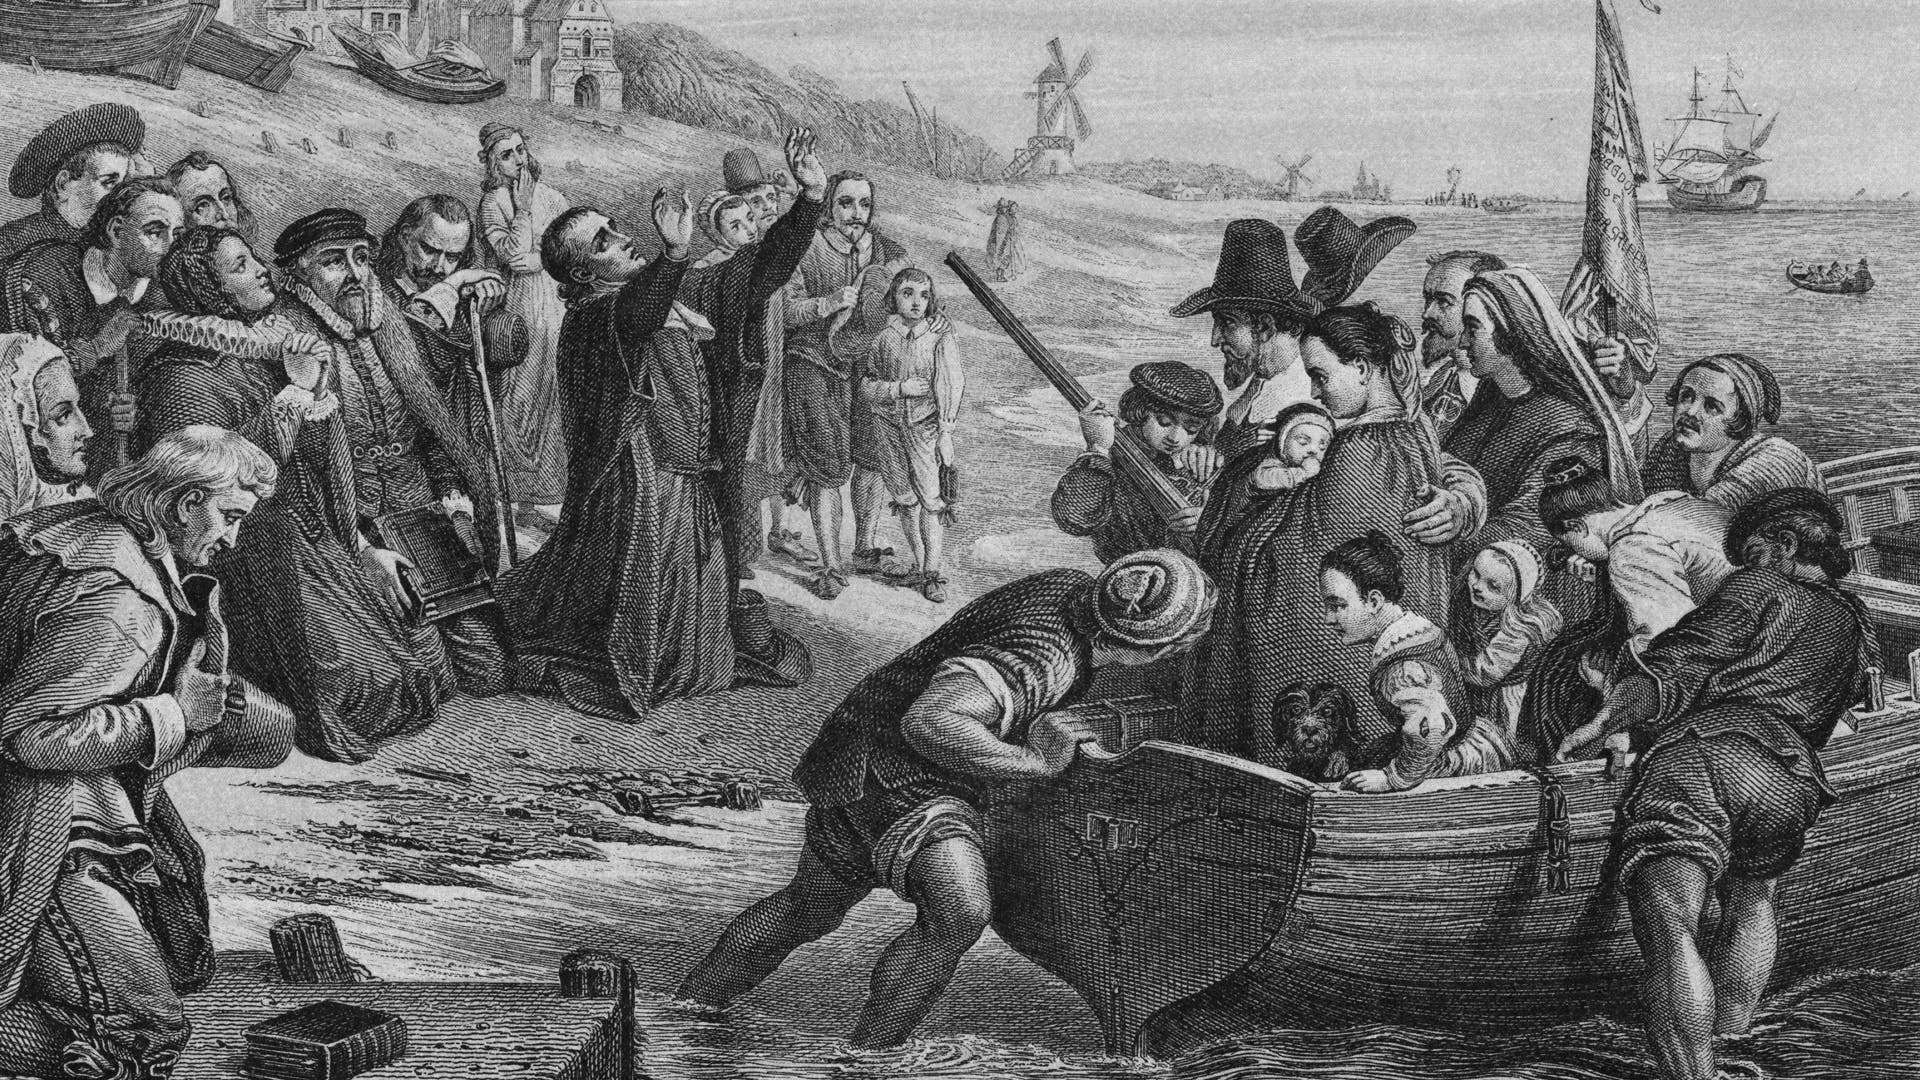 Why Did the Pilgrims Come to America?